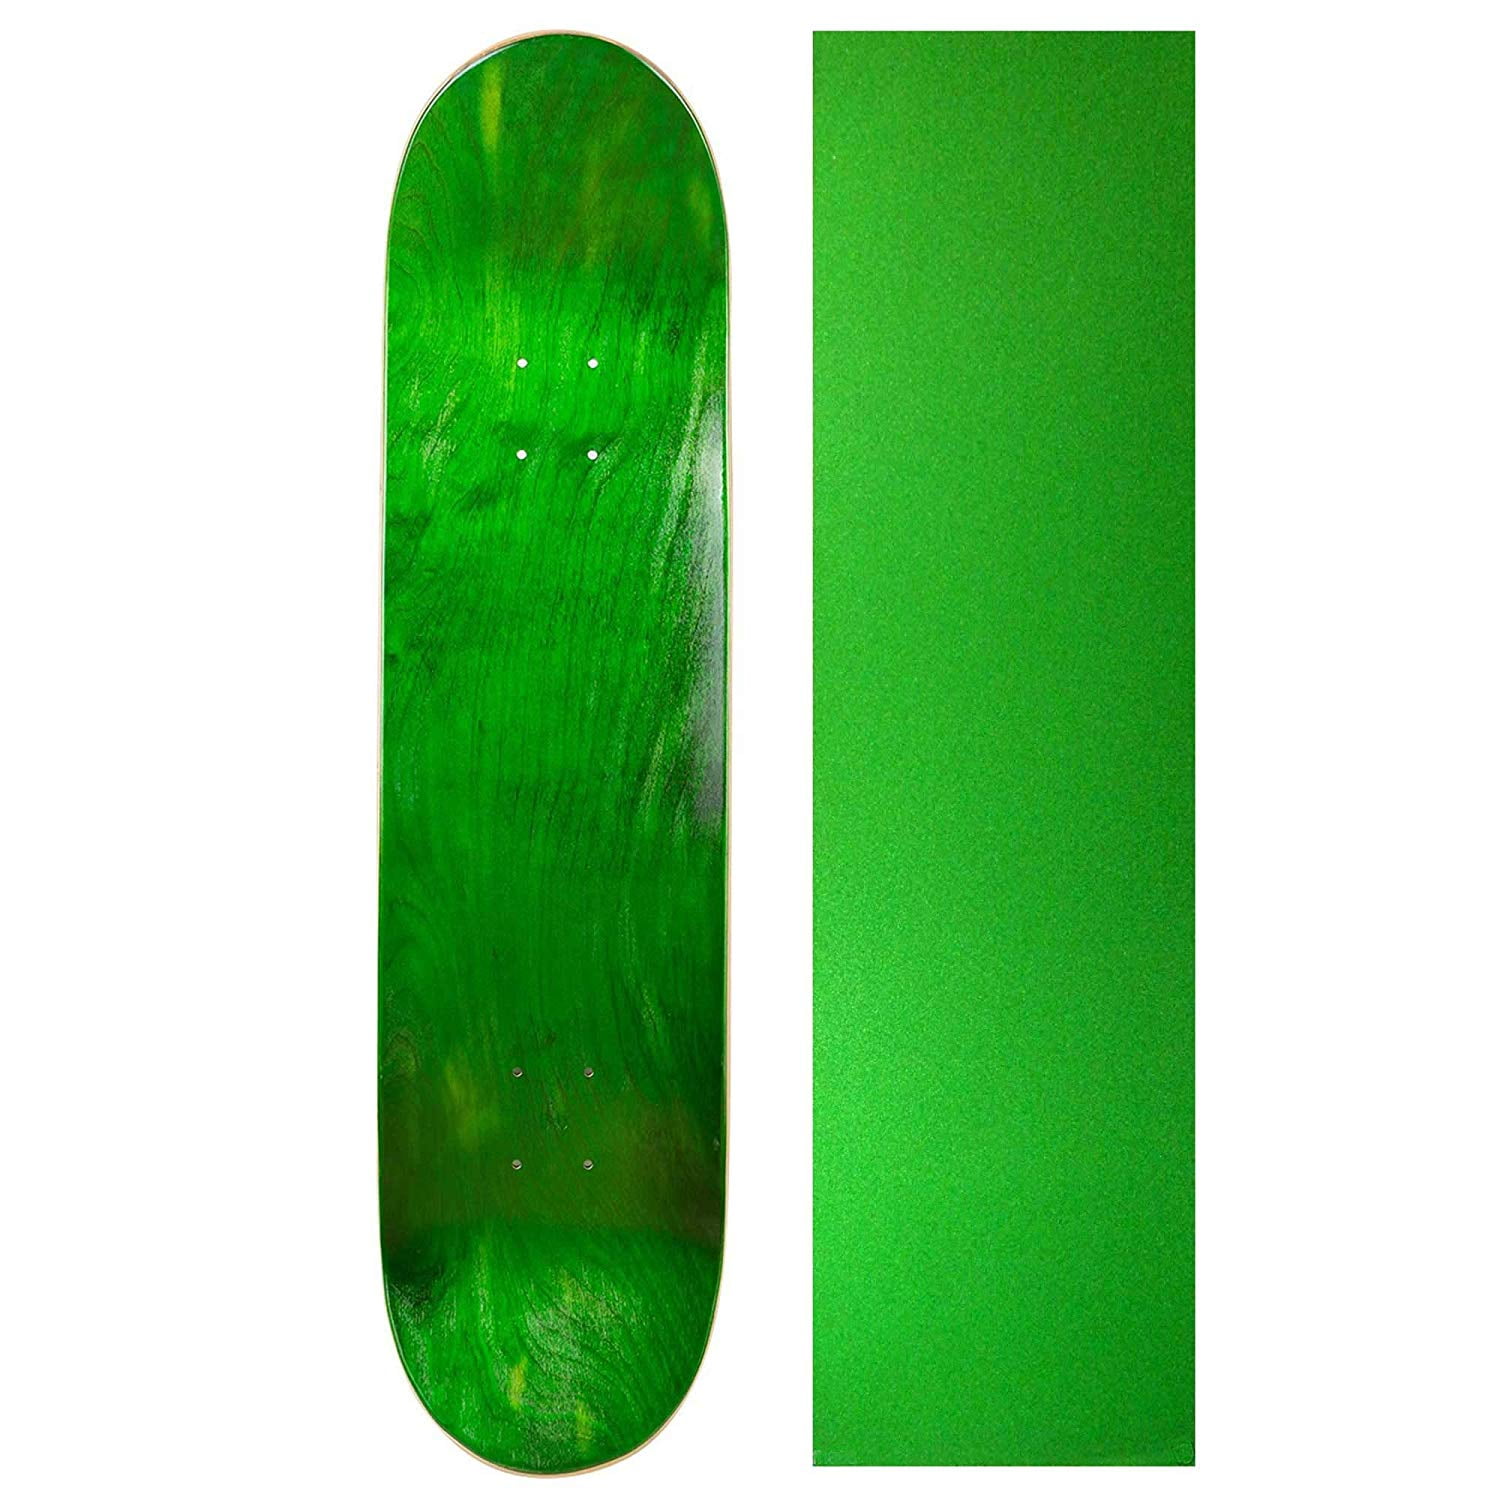 Cal 7 Blank Deck with Mob Green Glitter Grip Tape 